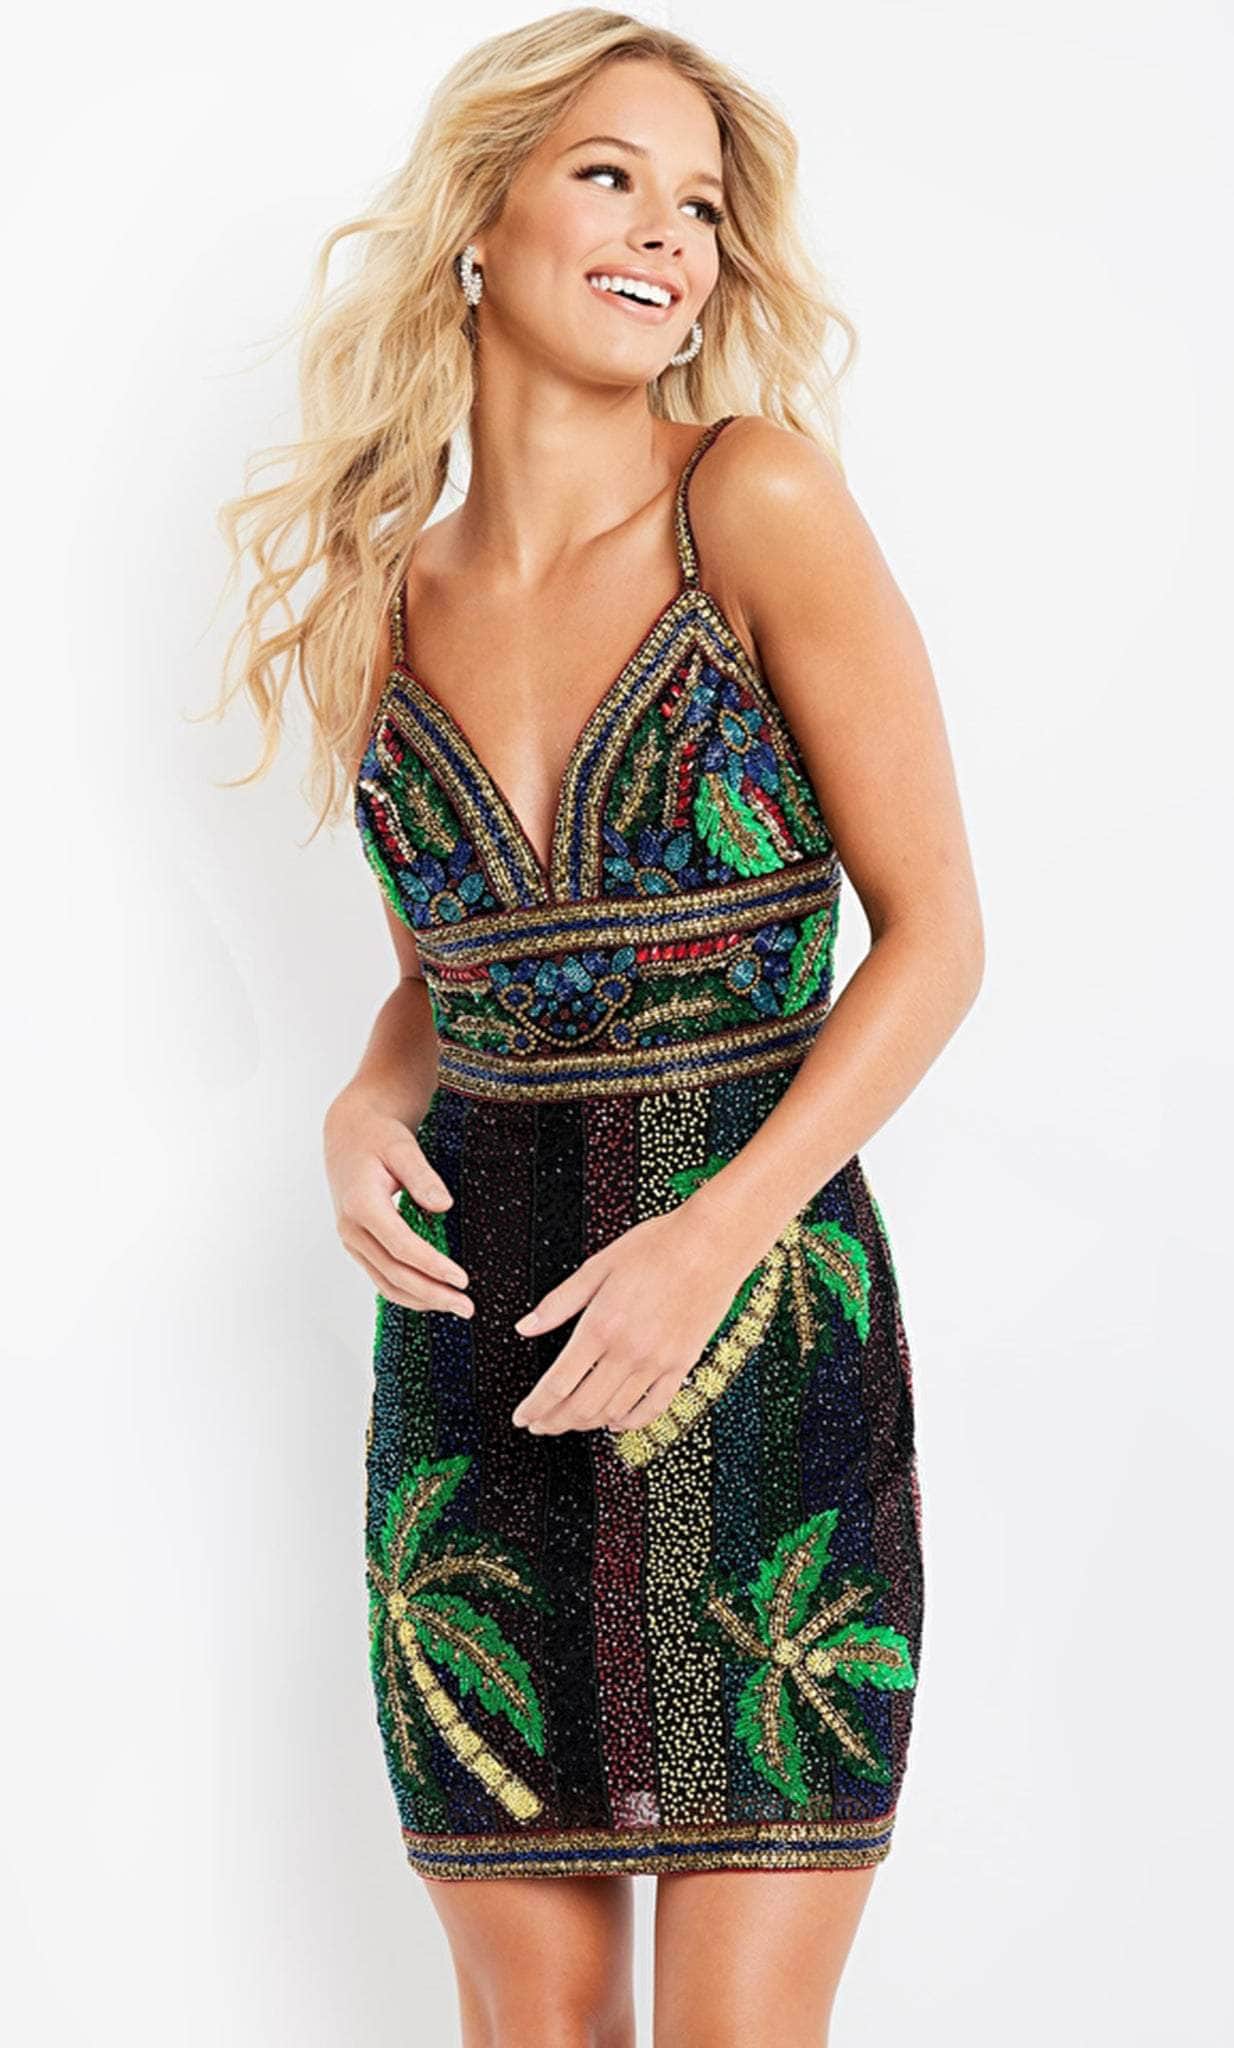 Image of Jovani 09908 - Multicolored Palm-Detailed Dress